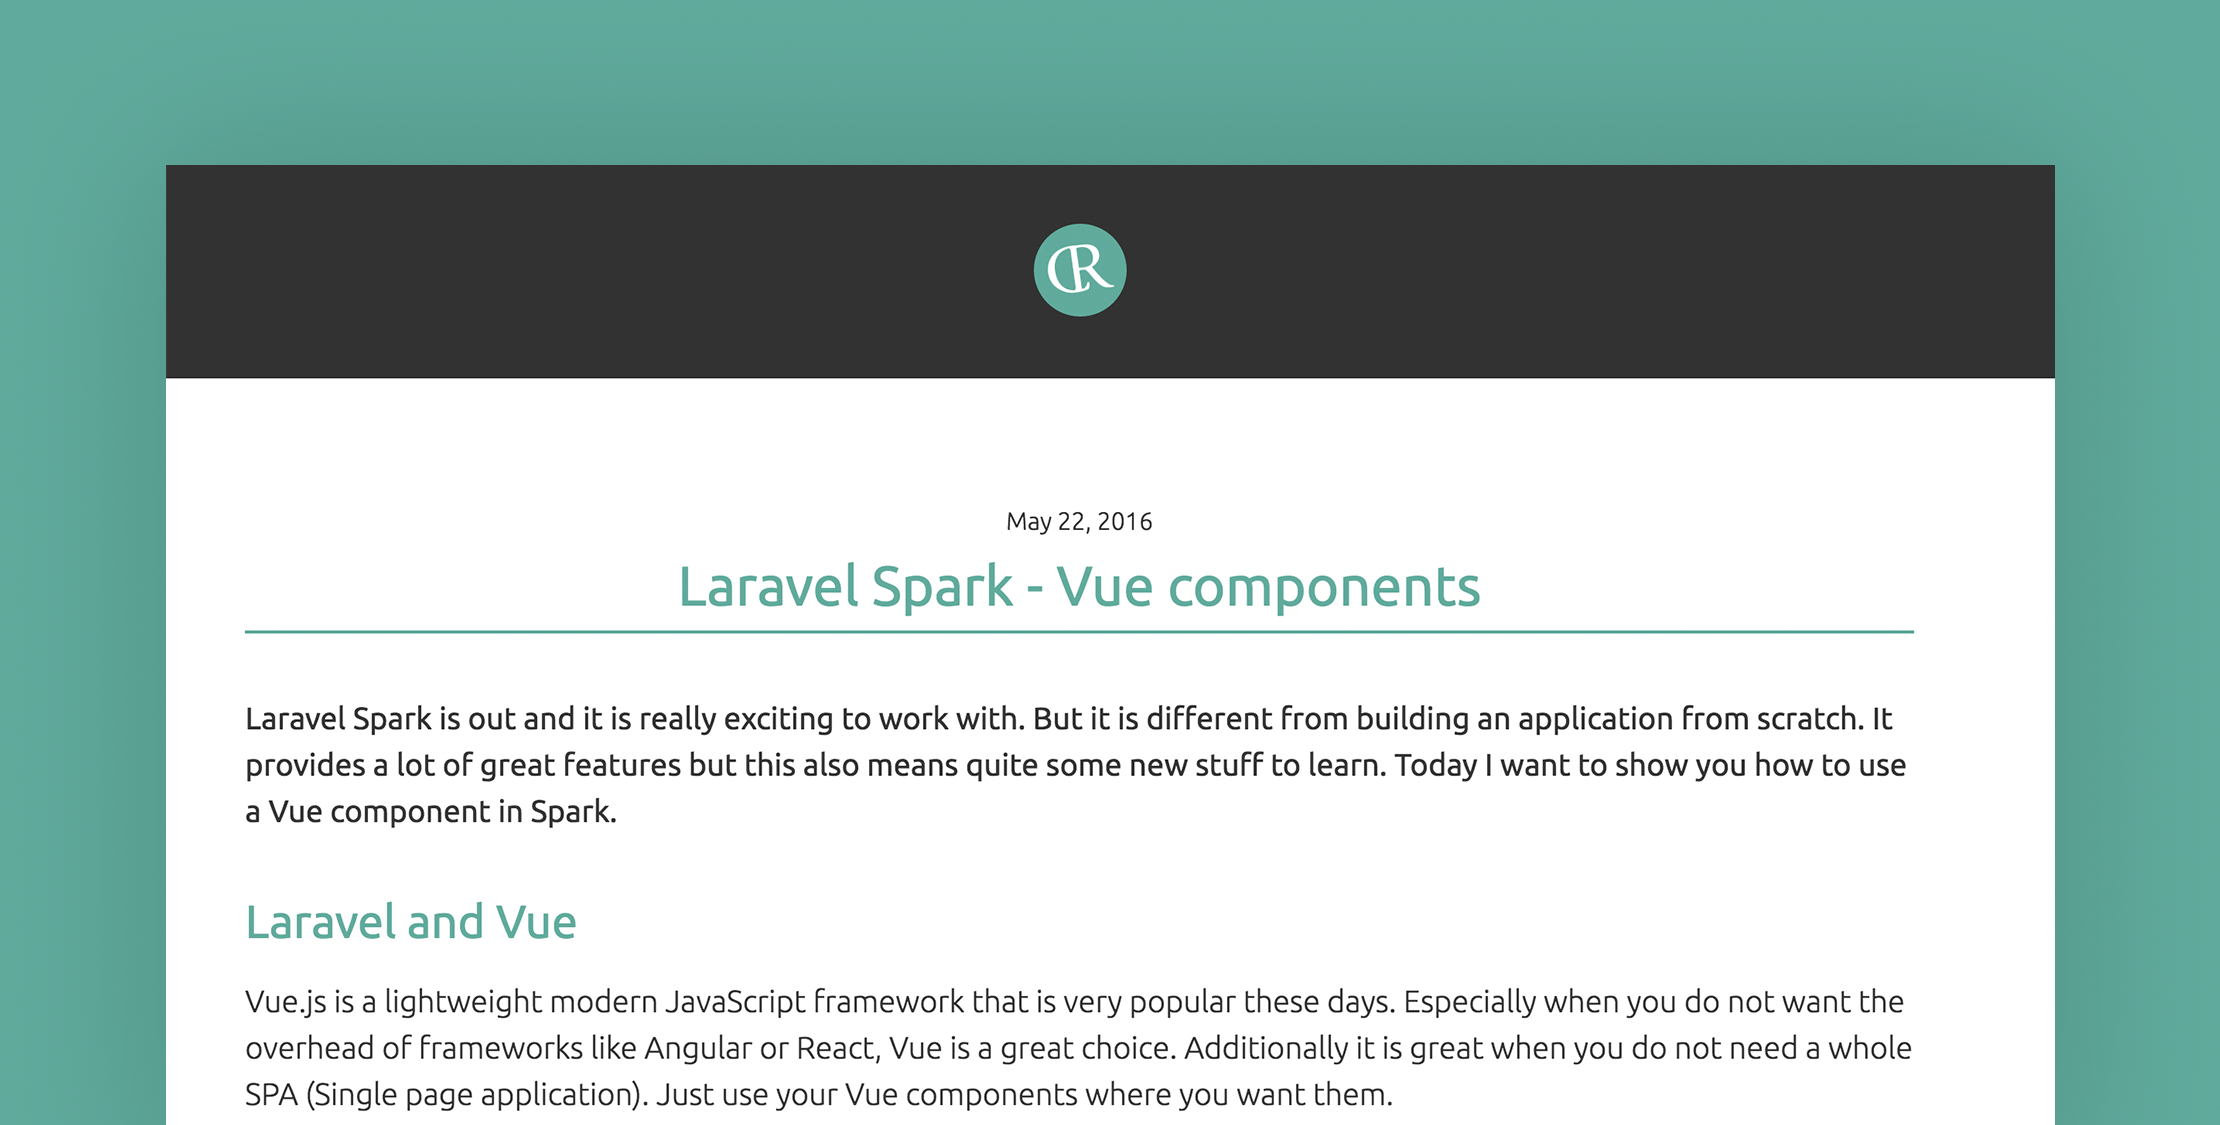 Adding your own Vue components to Spark image